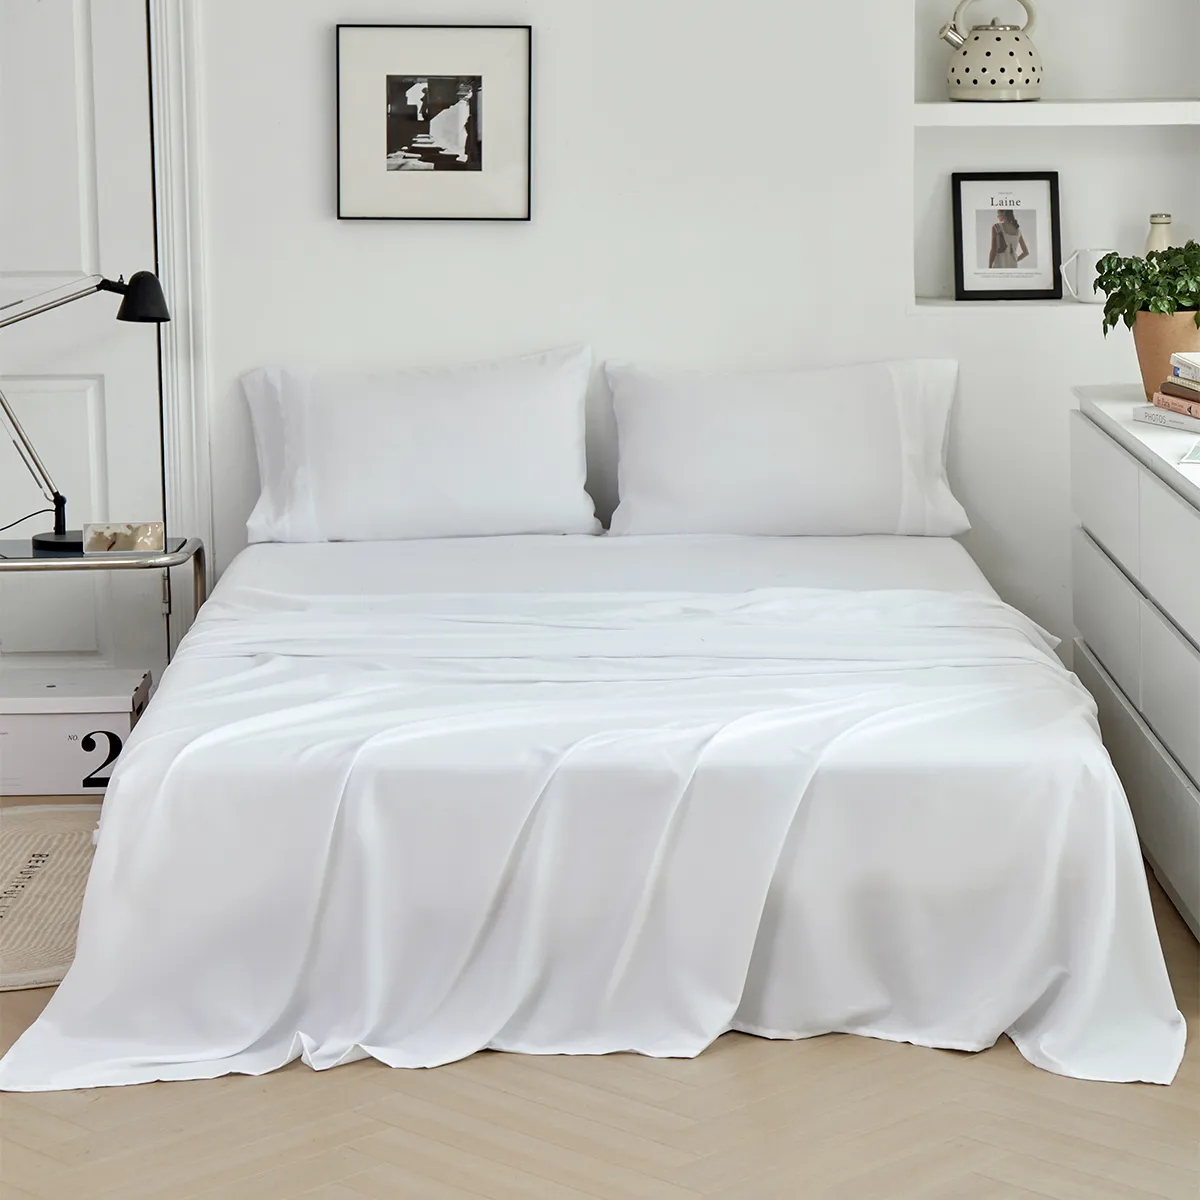 Solid Color Bedding Set: Three-piece Set with Fitted Sheet, Pillowcase, and Flat Sheet  White big image 1